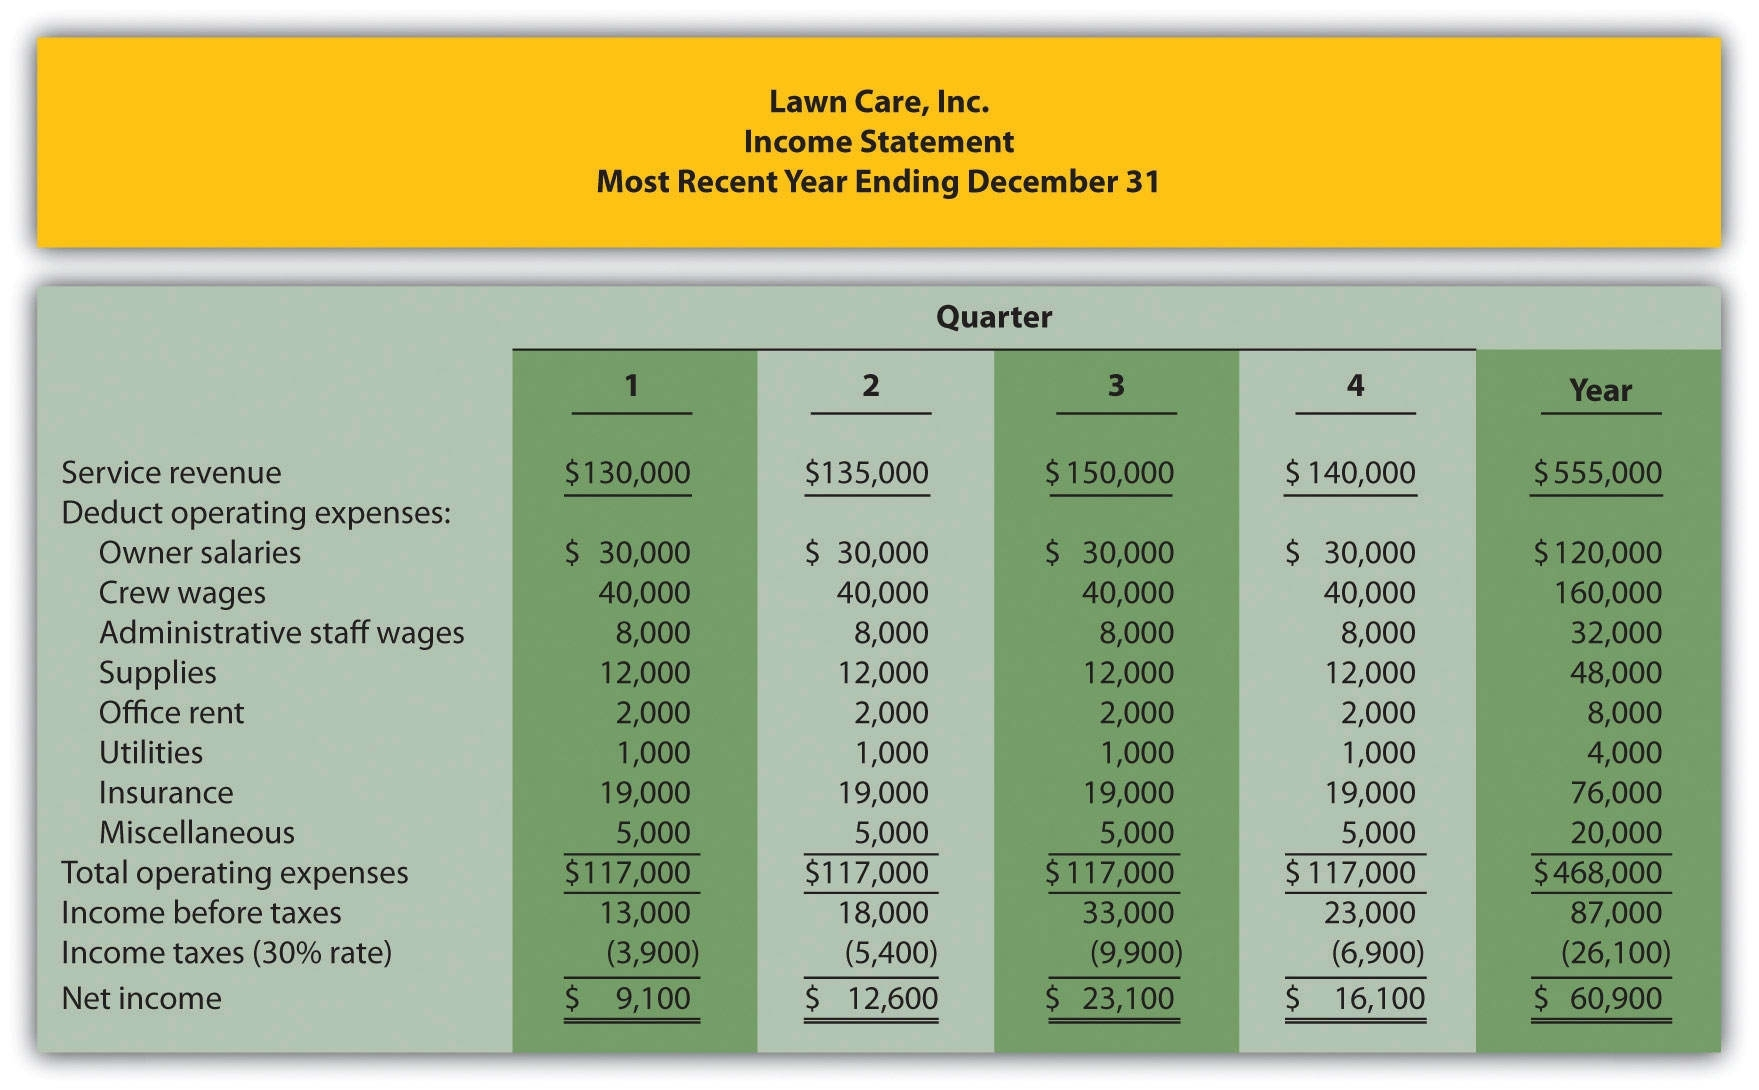 Business Expenses Spreadsheet | Wolfskinmall Together With Lawn Care Inside Lawn Care Business Expenses Spreadsheet